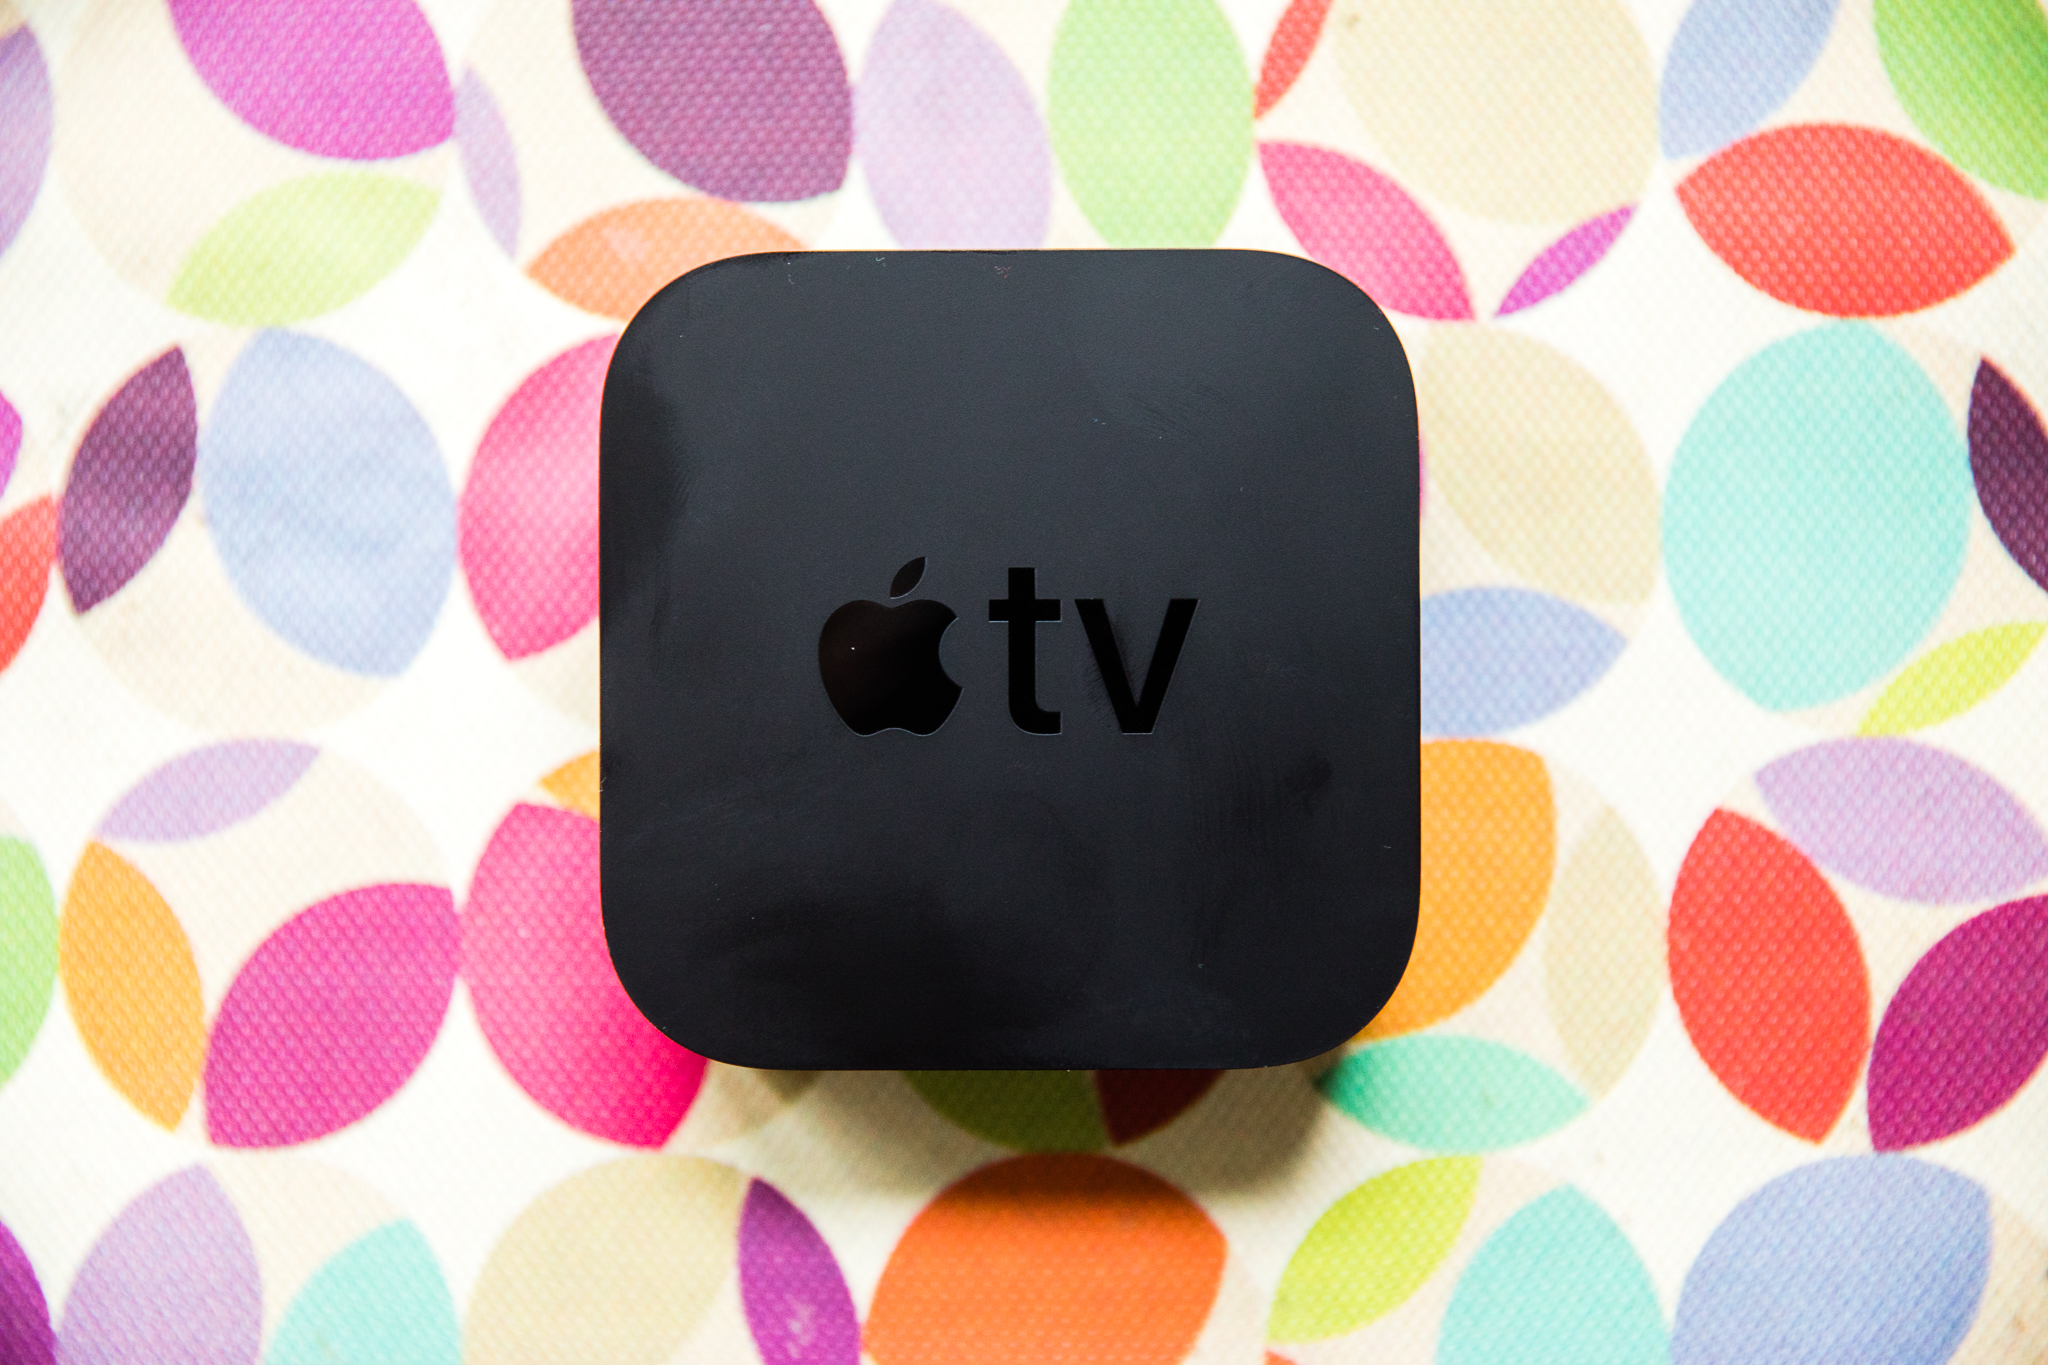 Can the Apple TV 4K be a cord-cutter’s only streaming device?